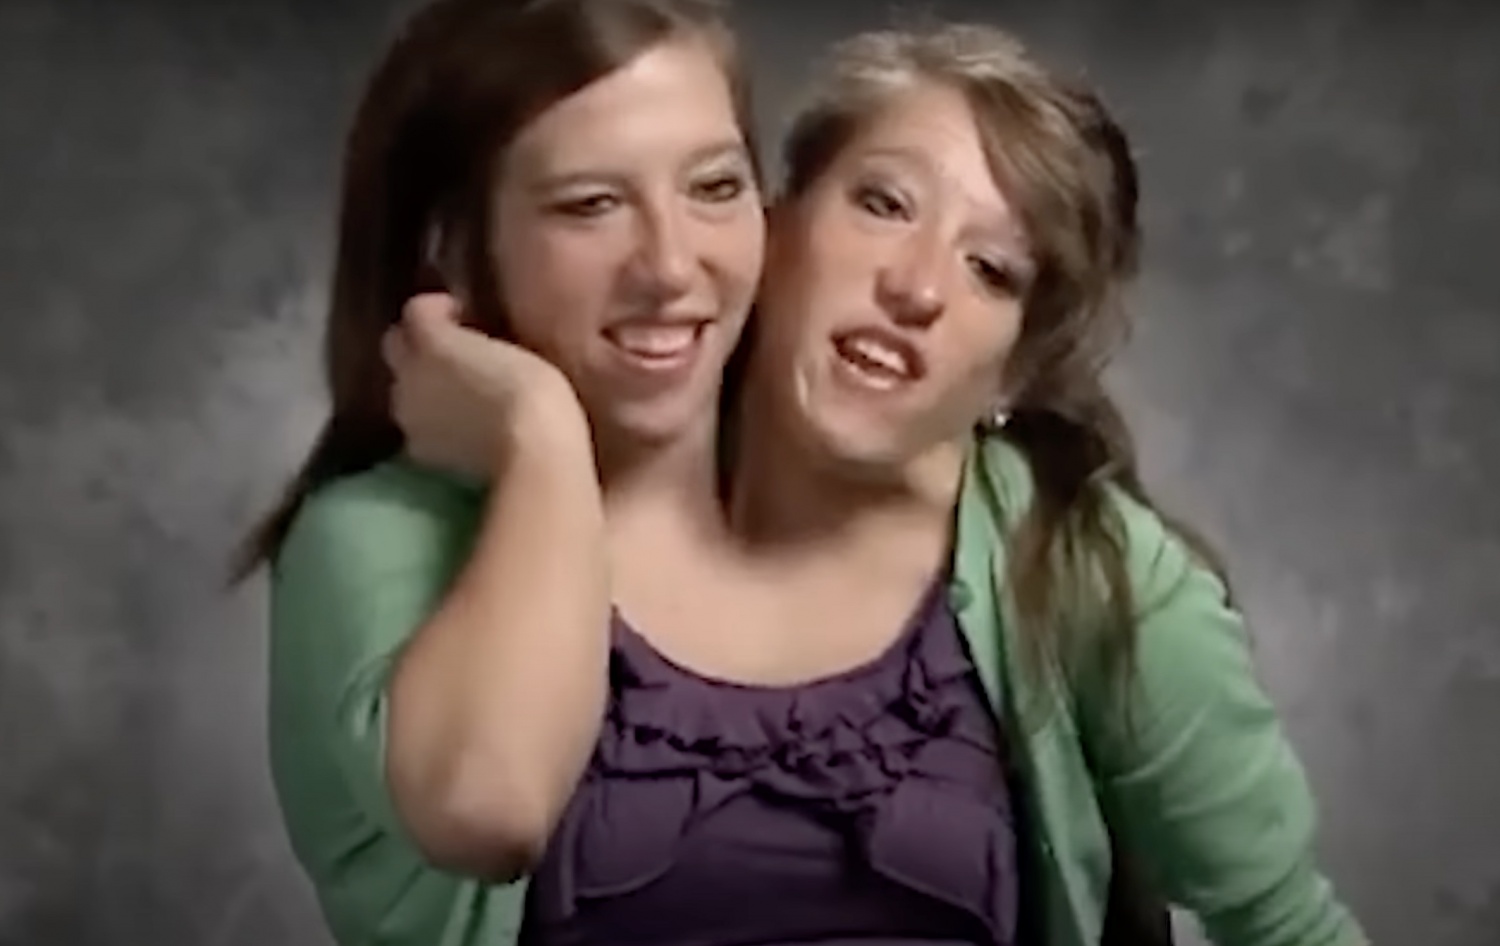 One of Conjoined Twins Abby and Brittany Hensel, Famous from TLC Show, is Now Married and Expanding Family | HNGN [Video]